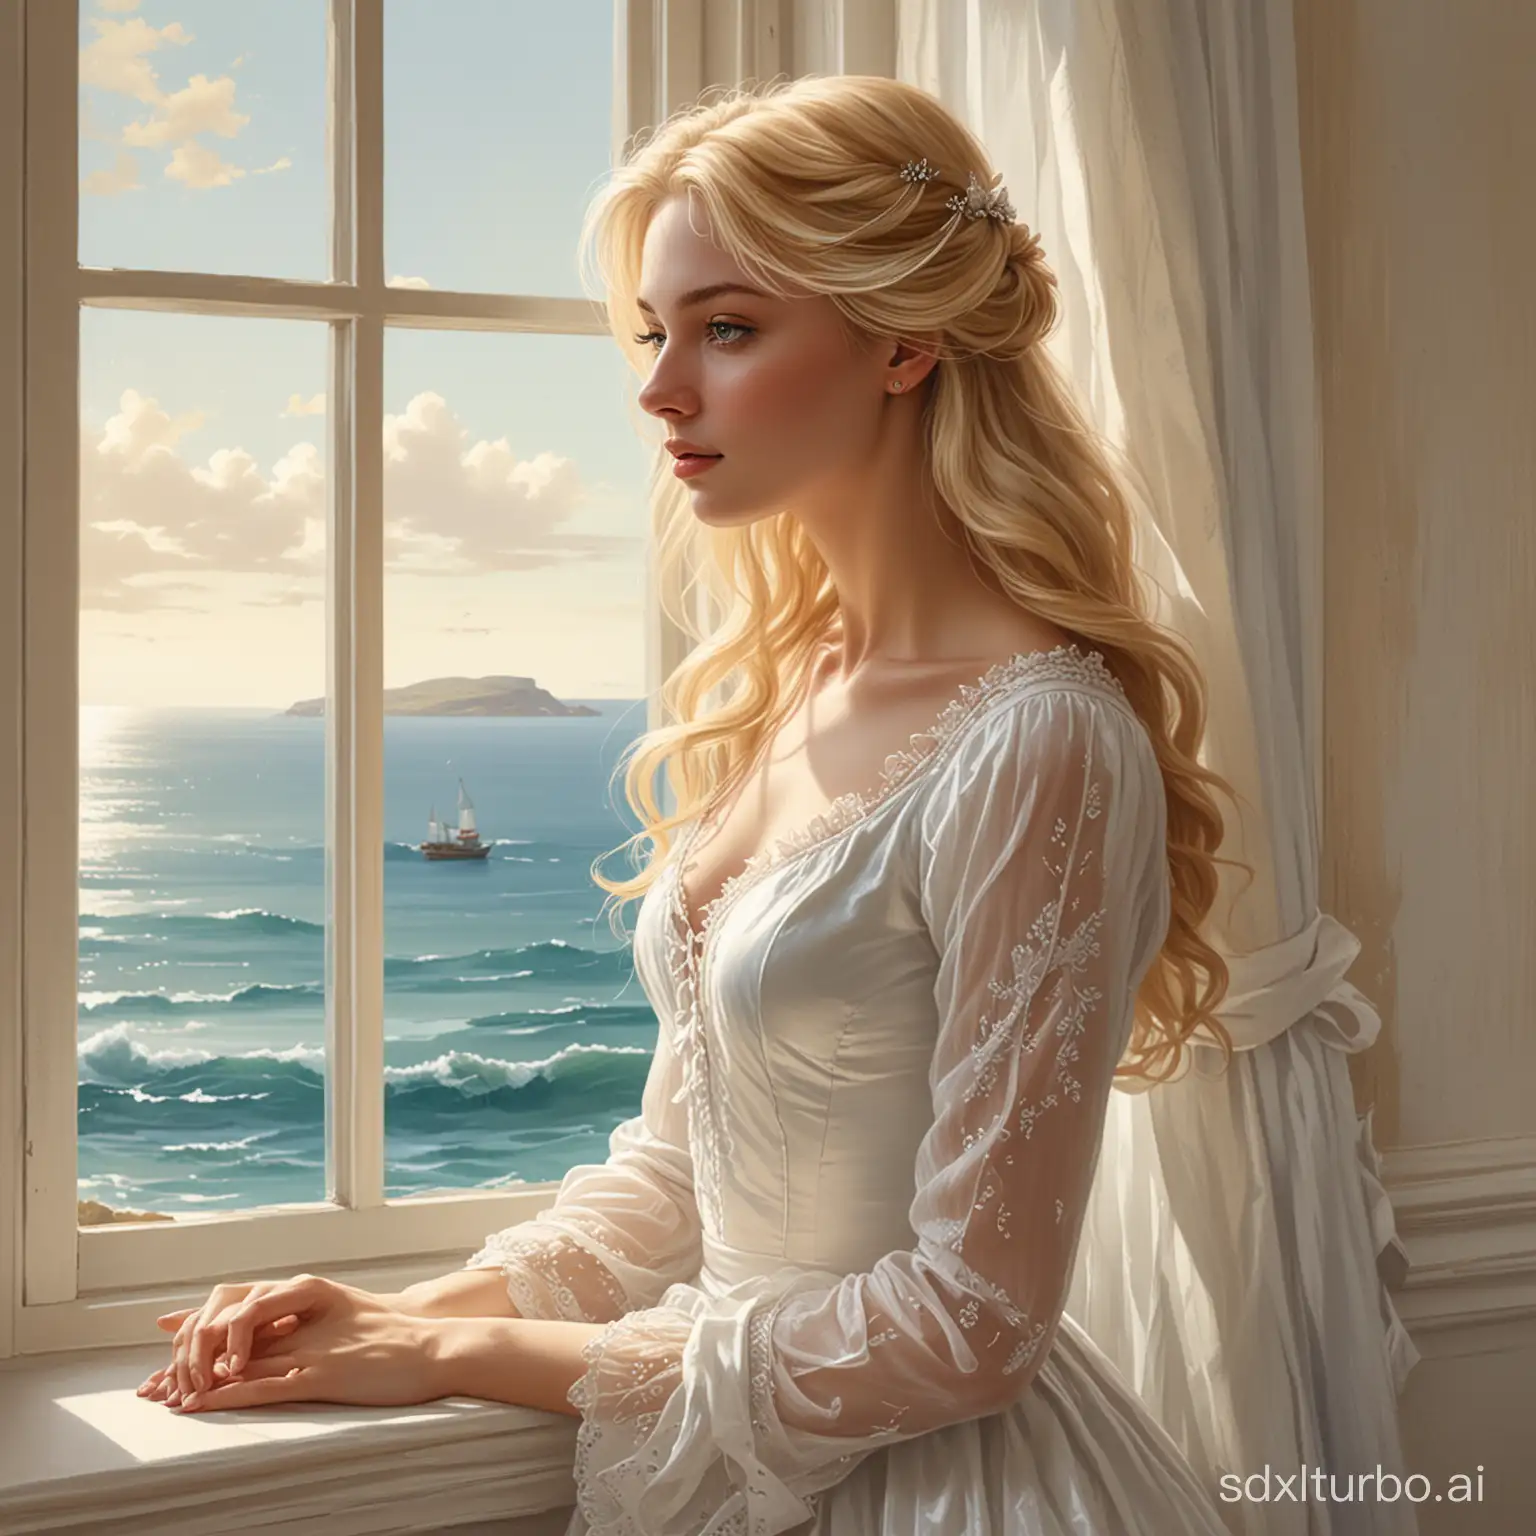 ma, a painting of a beautiful blond woman perfect, in front of a window by the sea, beautiful illustration, a beautiful artwork illustration, storybook art, alice , fairy-tale illustration style, fairy tale illustrations, elegant study, exquisite digital illustration, fairy tale illustration, by artis in the art style of bowater, intricate beautiful painting, beautiful digital illustration, white dress